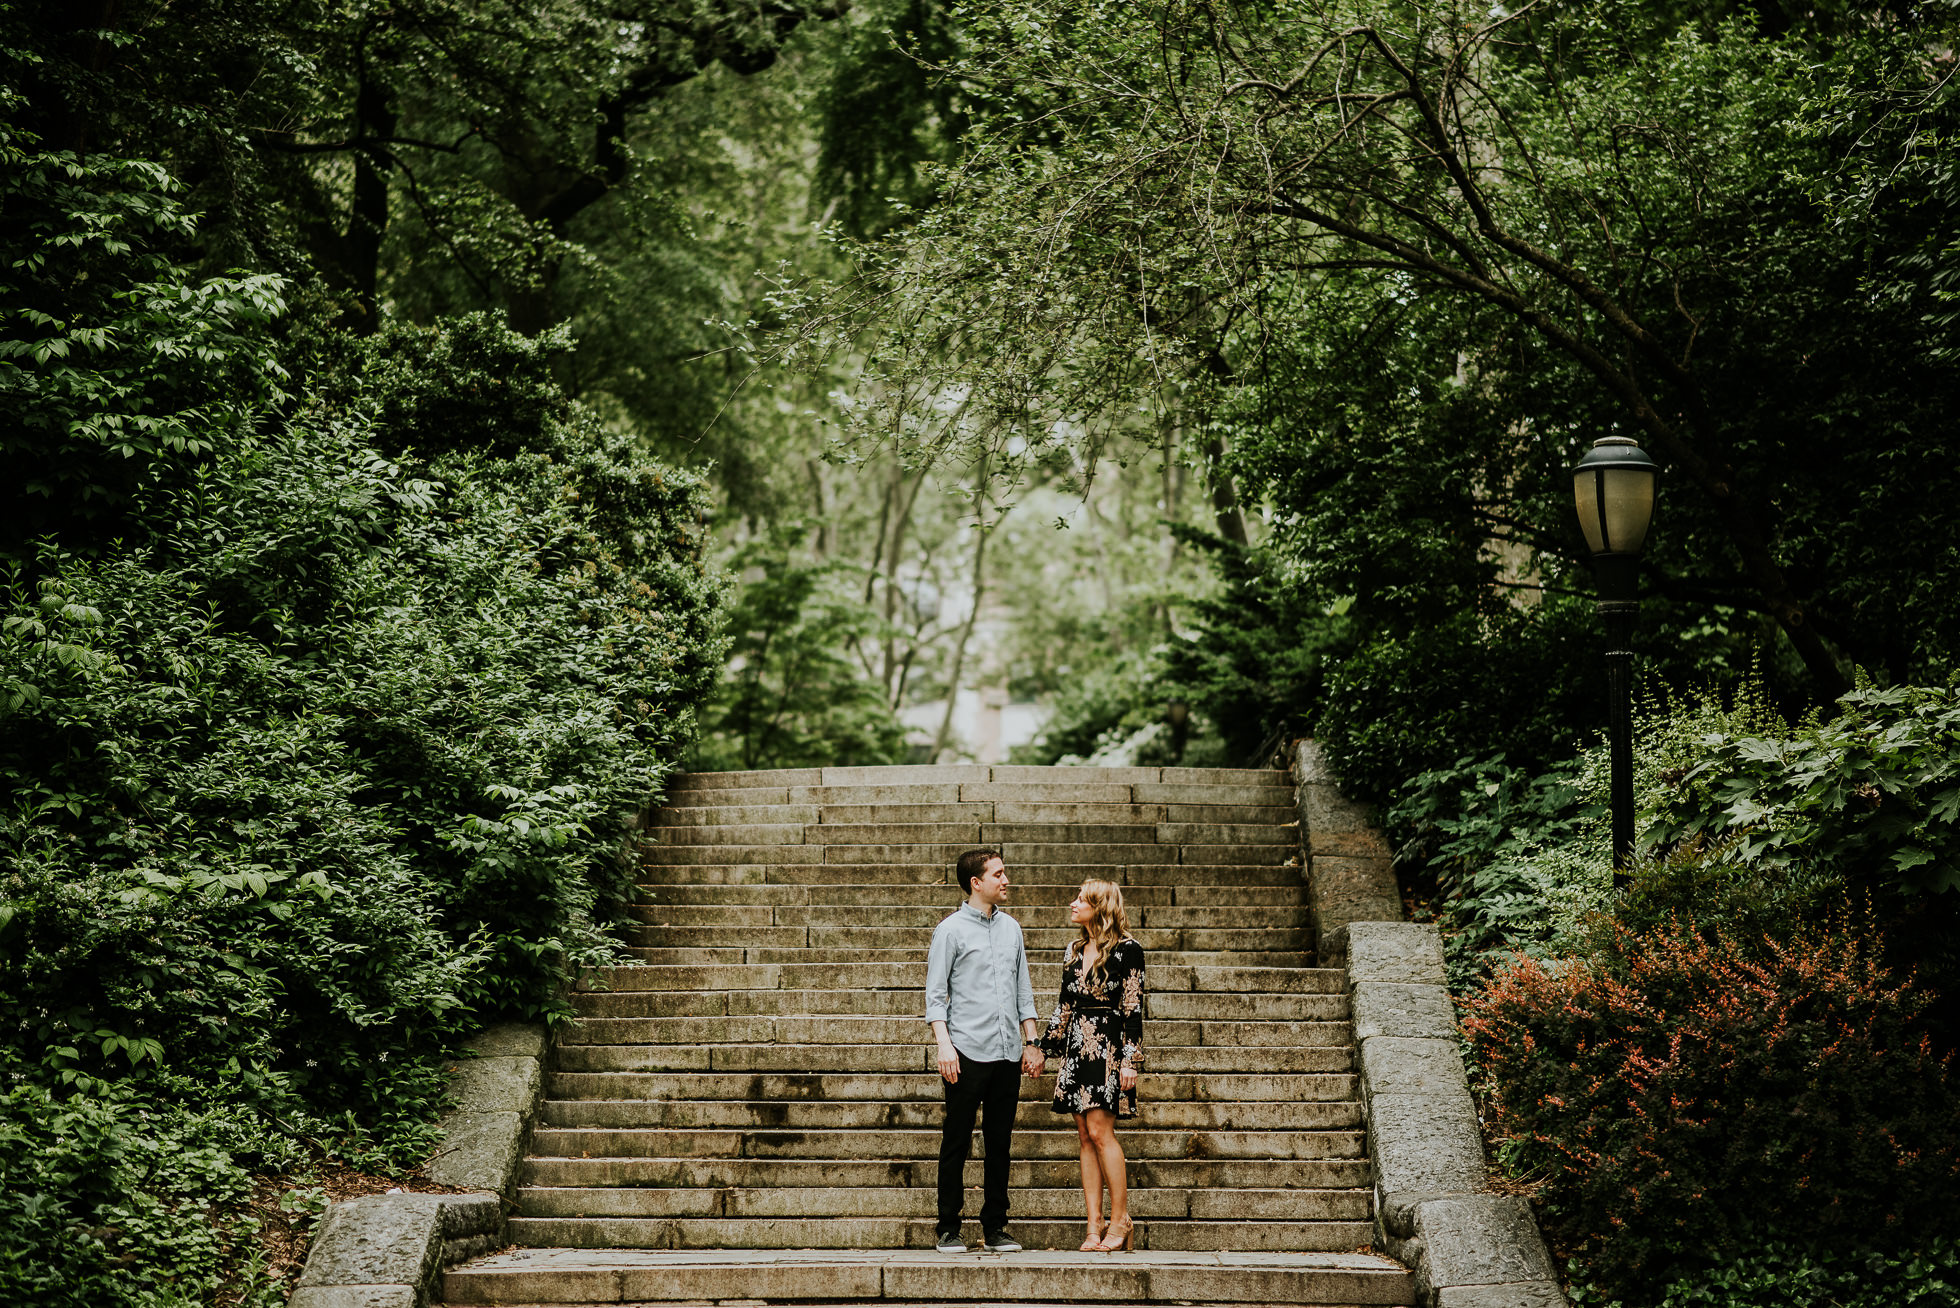 New York City engagement photo spots photographed by Traverse the Tides5